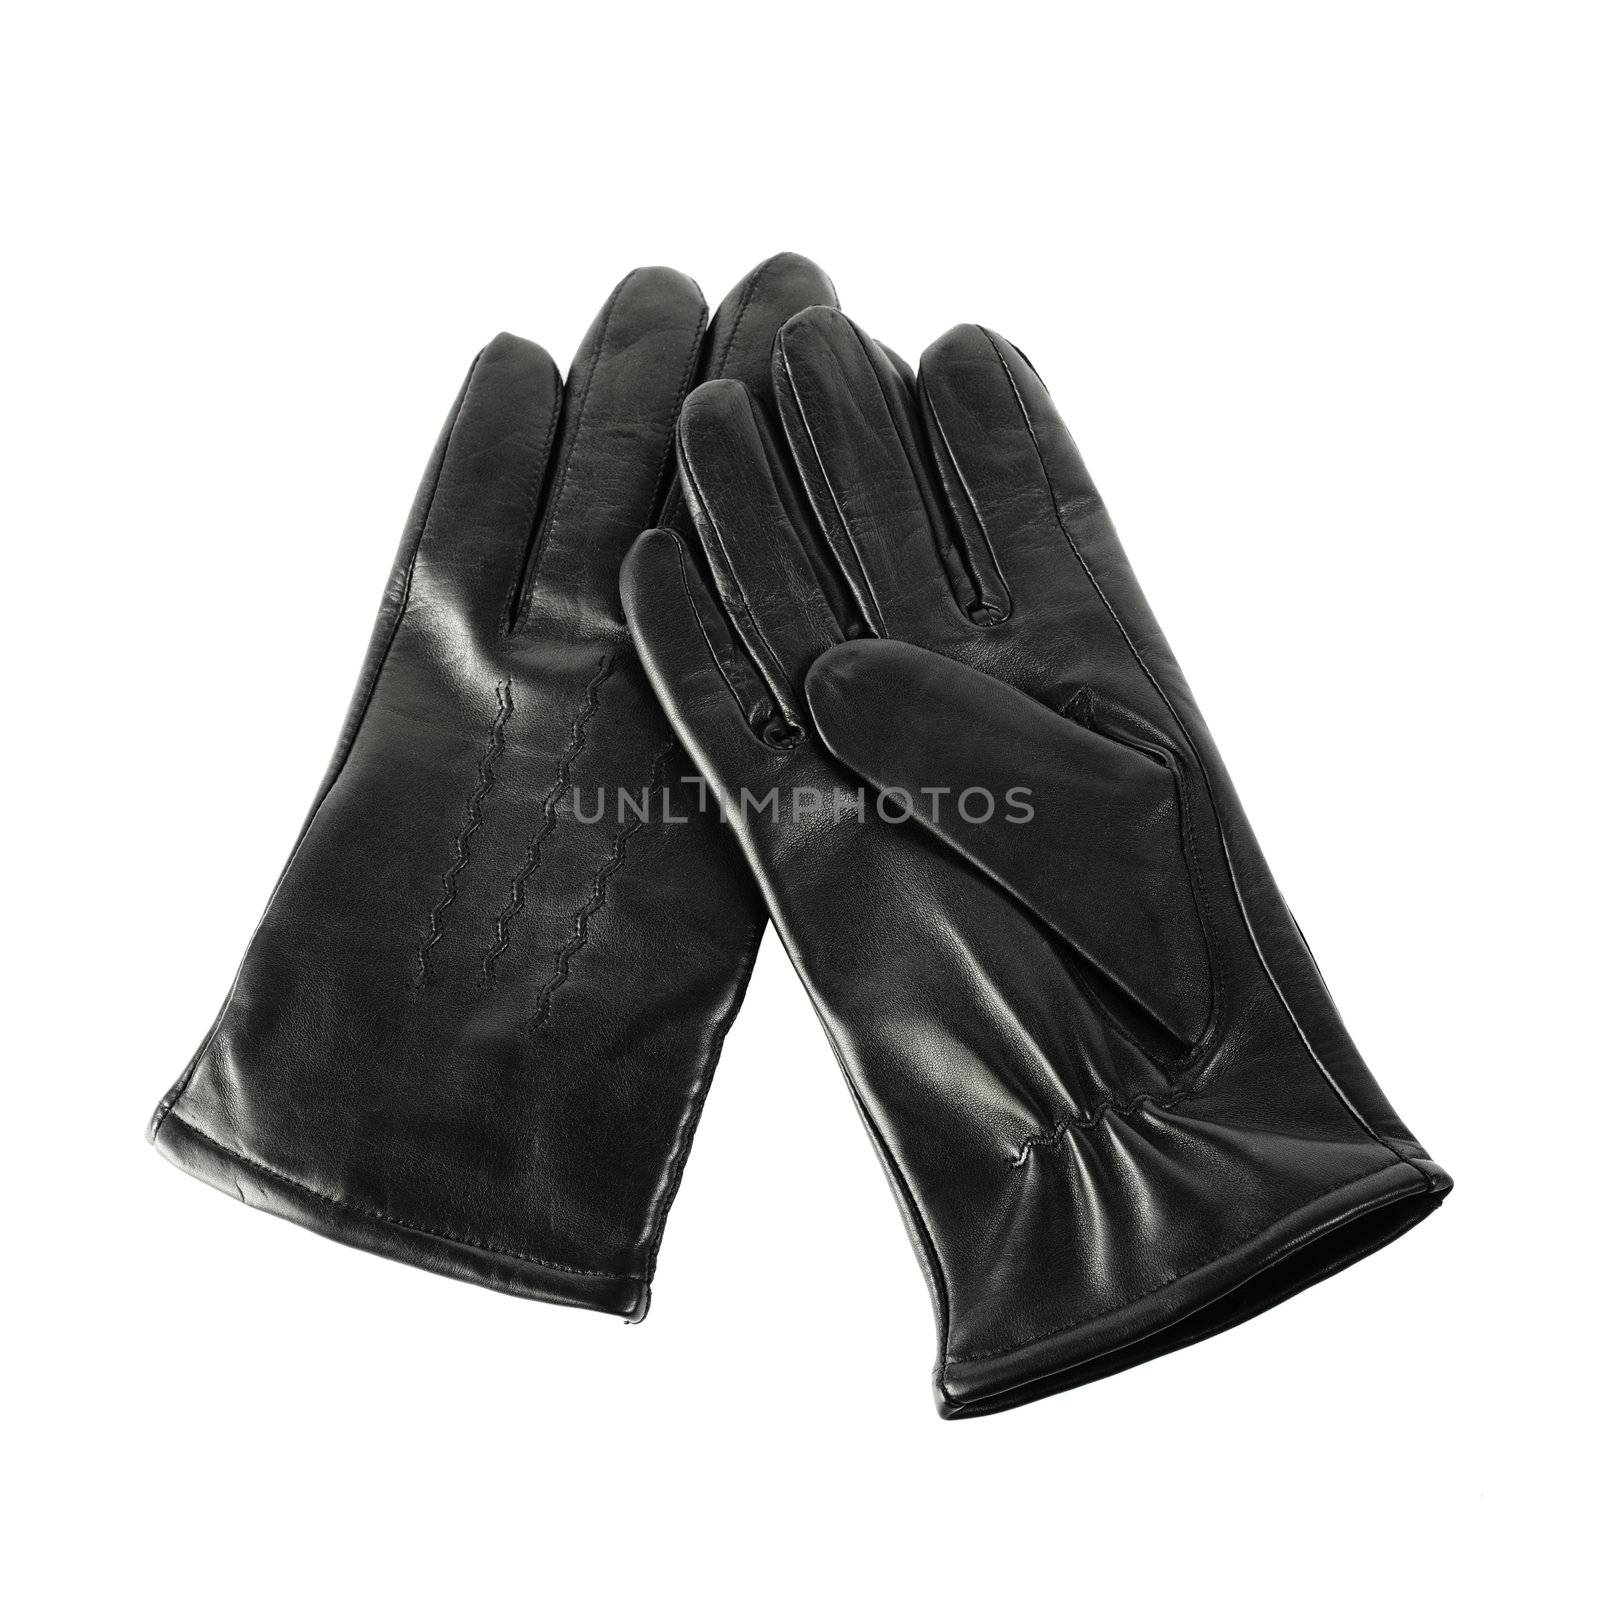 New gloves by Stocksnapper